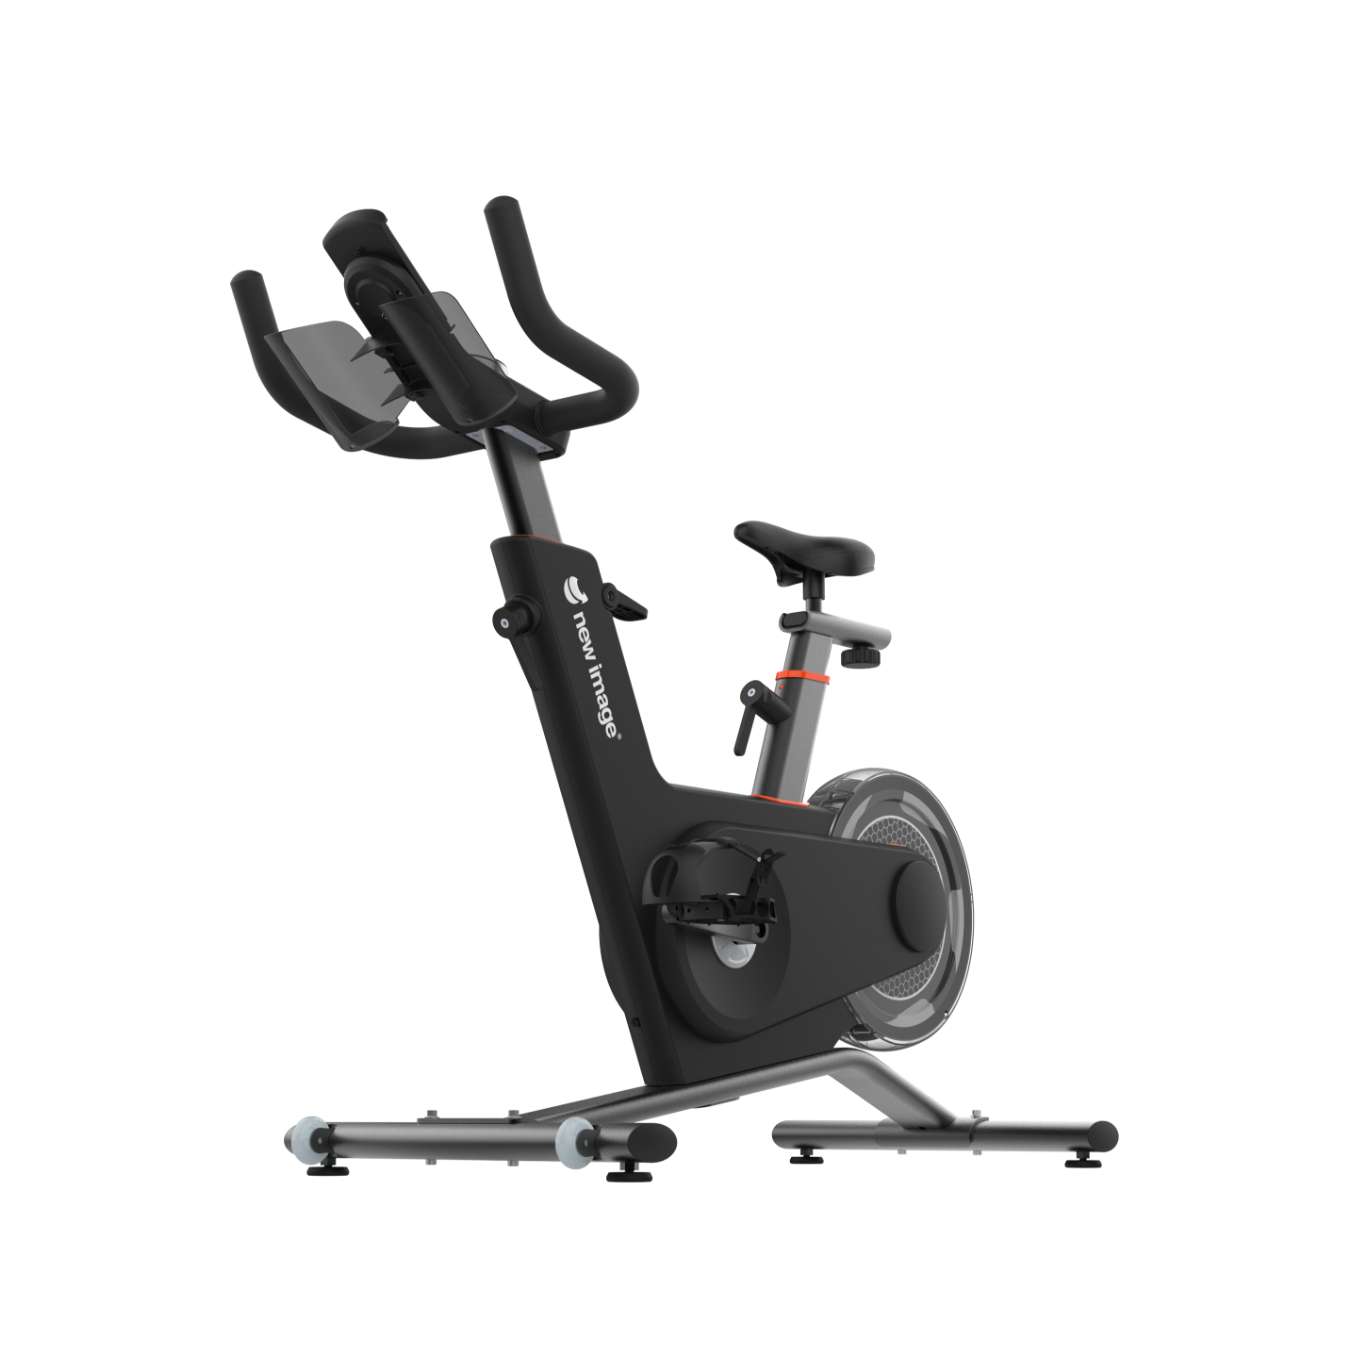 View FITT Rider Professional Indoor Exercise Bike By New Image High Street TV information